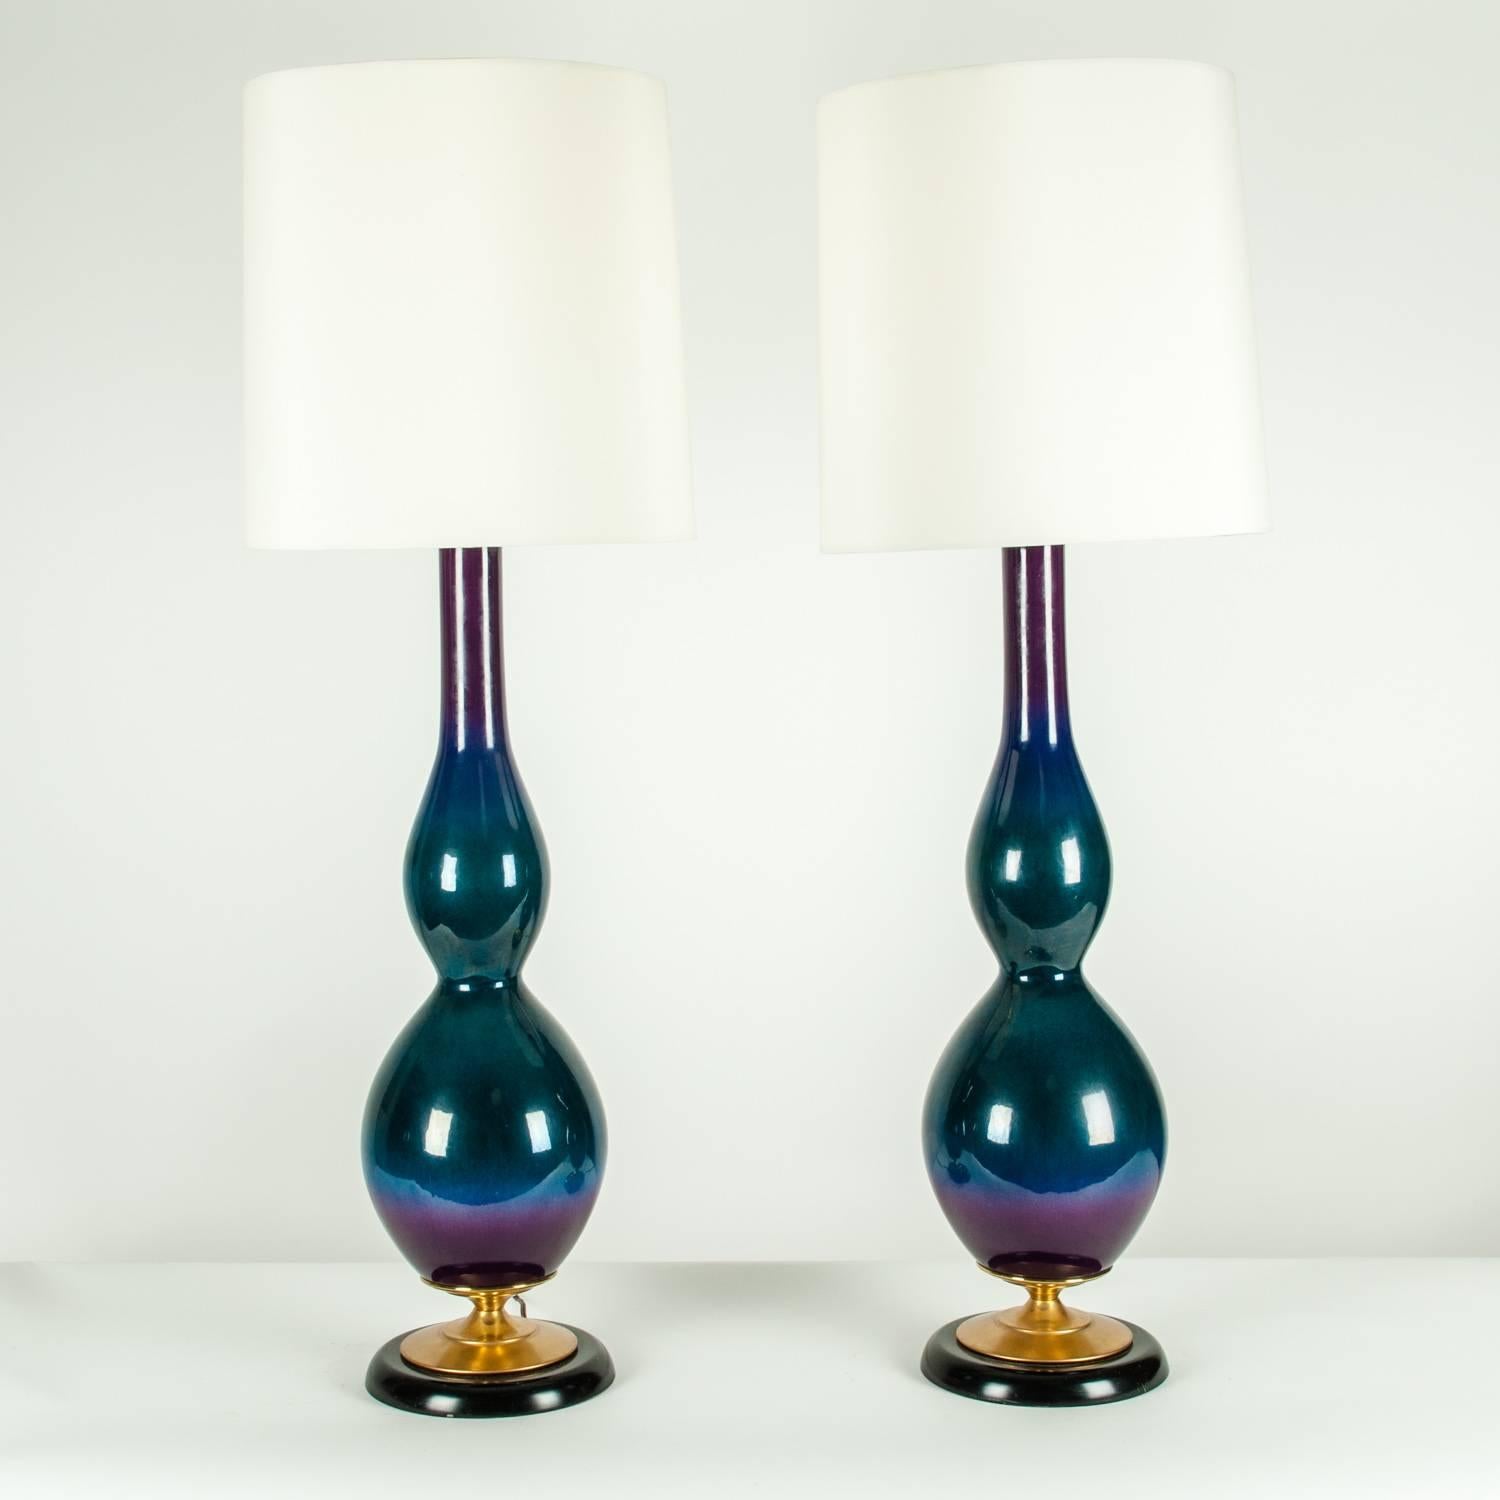 20th Century Pair of Mid-Century Modern Art Deco Porcelain Table Lamps